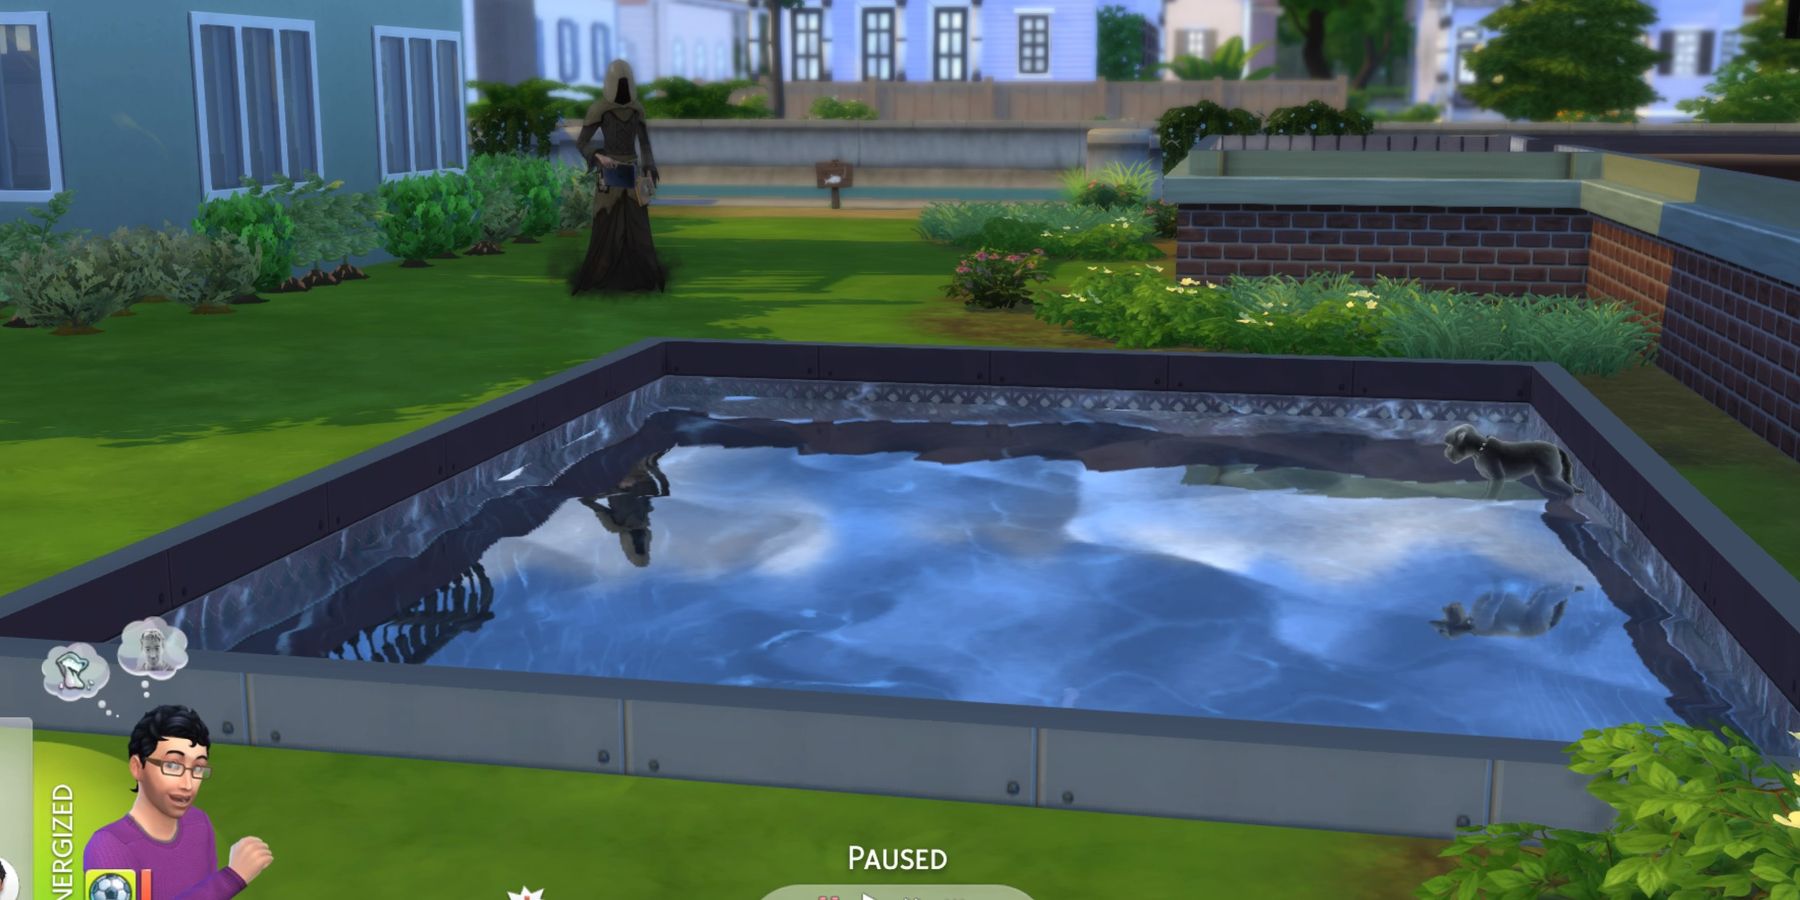 The Grim Reaper stands next to a pool in The Sims 4